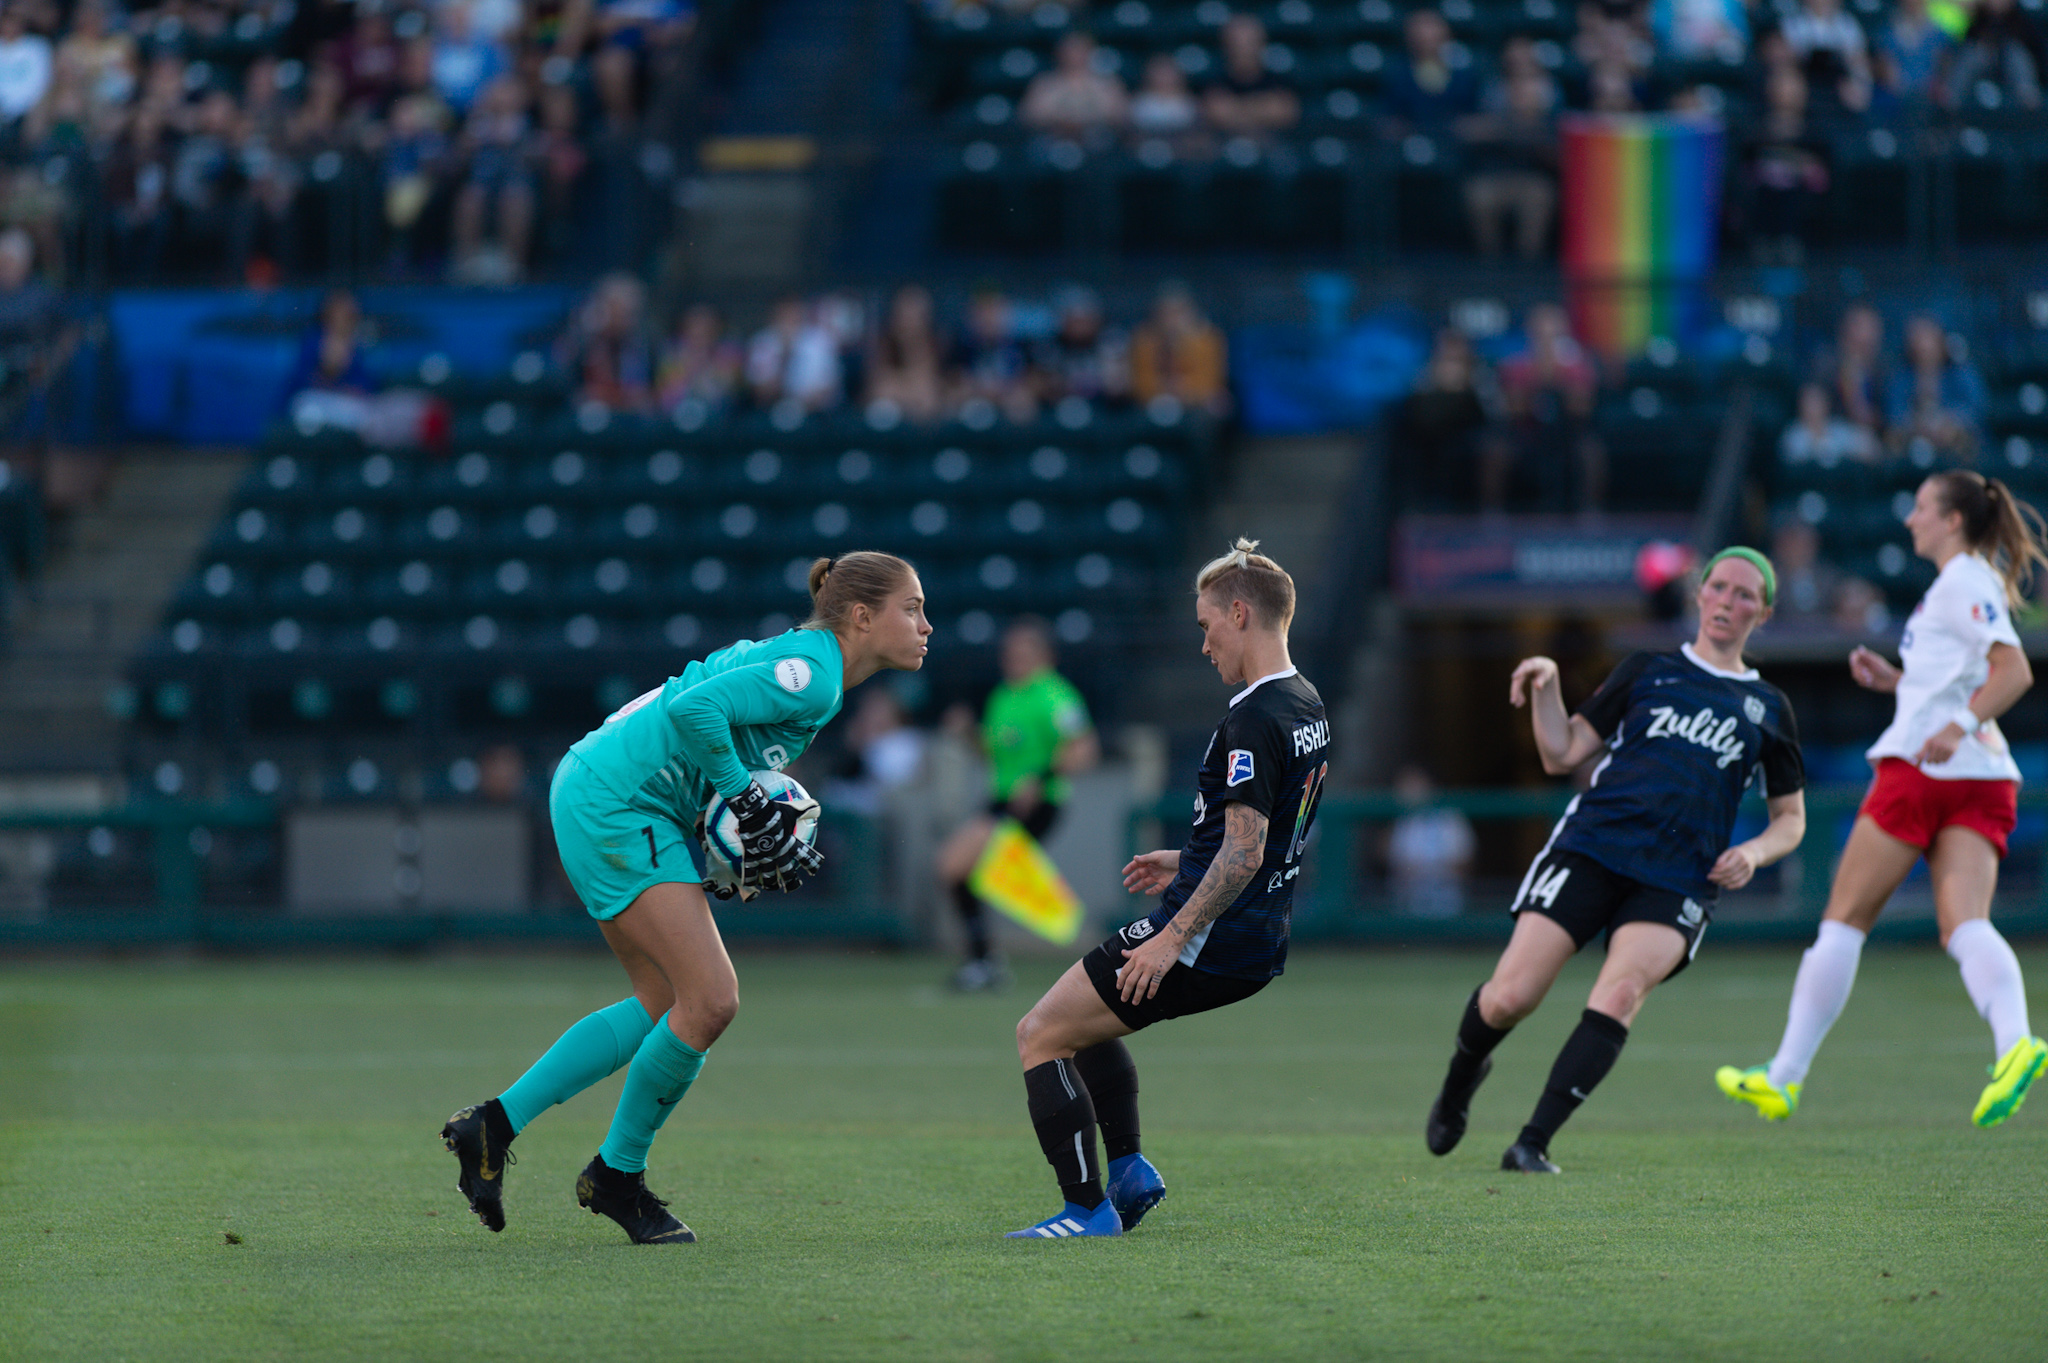 Sullivan strikes as Spirit split with Reign FC away from home Featured Image